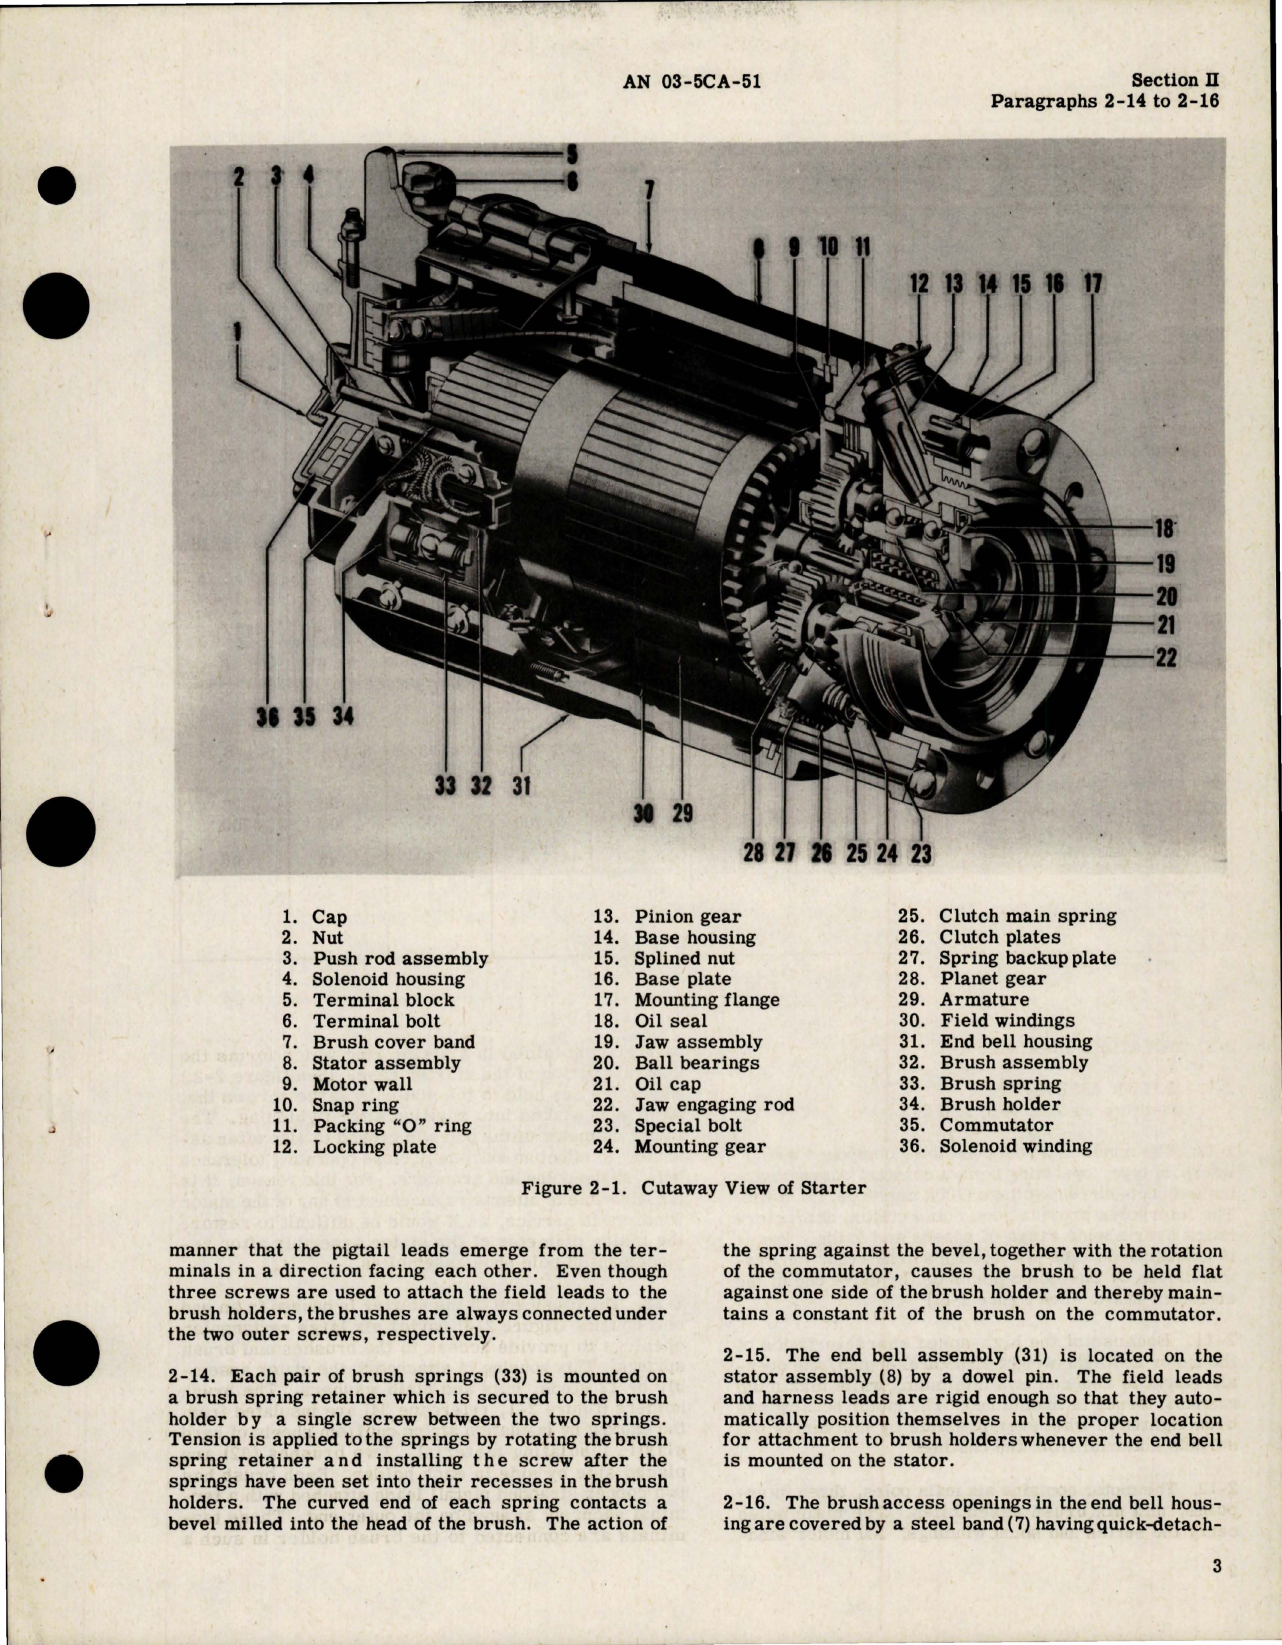 Sample page 7 from AirCorps Library document: Operation and Service Instructions for Electric Starters - D26-2, D27, D27-1, D27-1Z, D31-1, D31-2 and D31-2Z